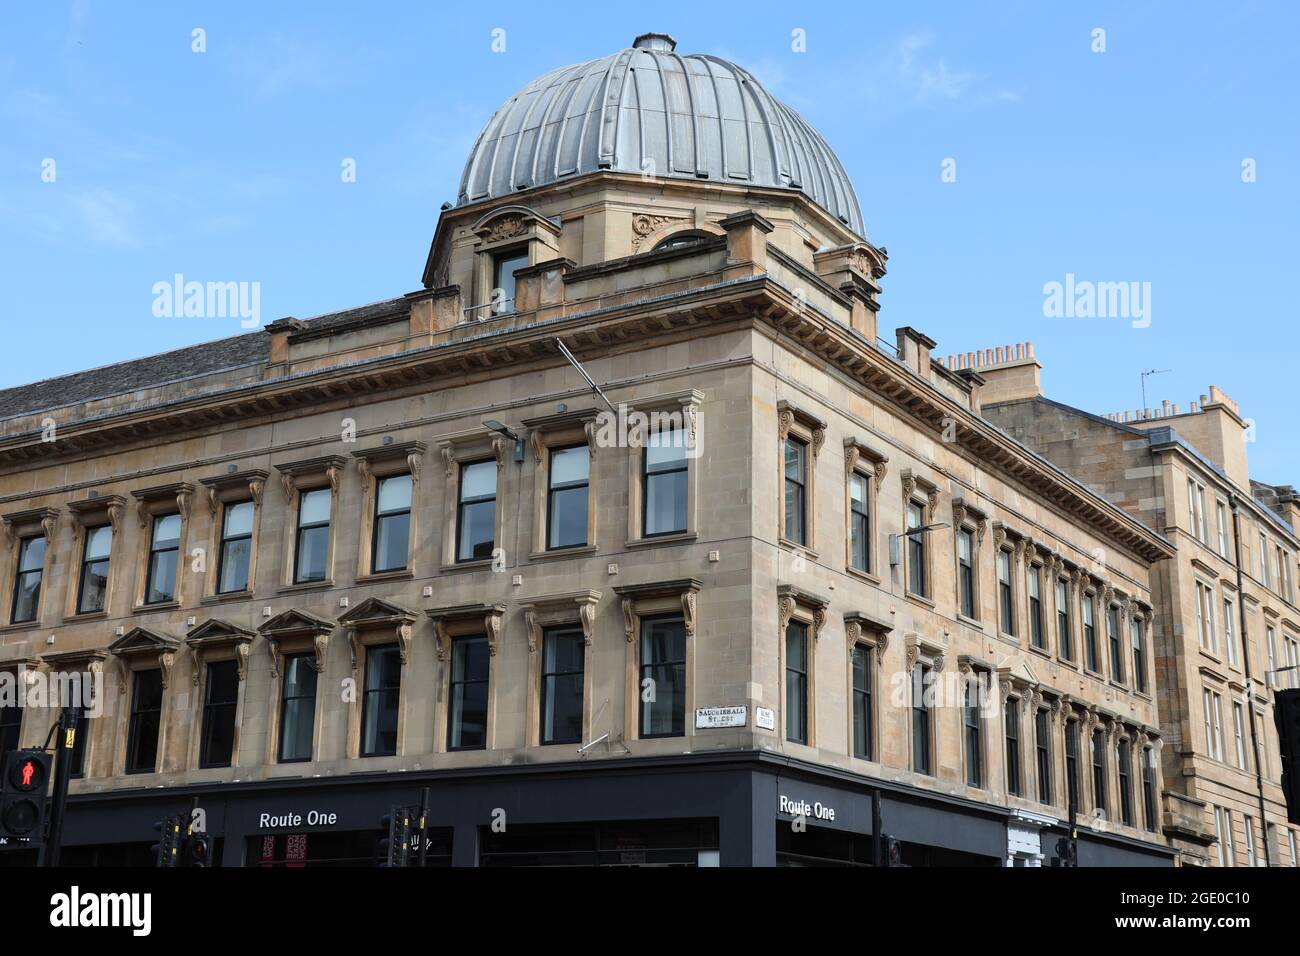 McLellan Galleries and Route One store at Sauchiehall Street in Glasgow Stock Photo